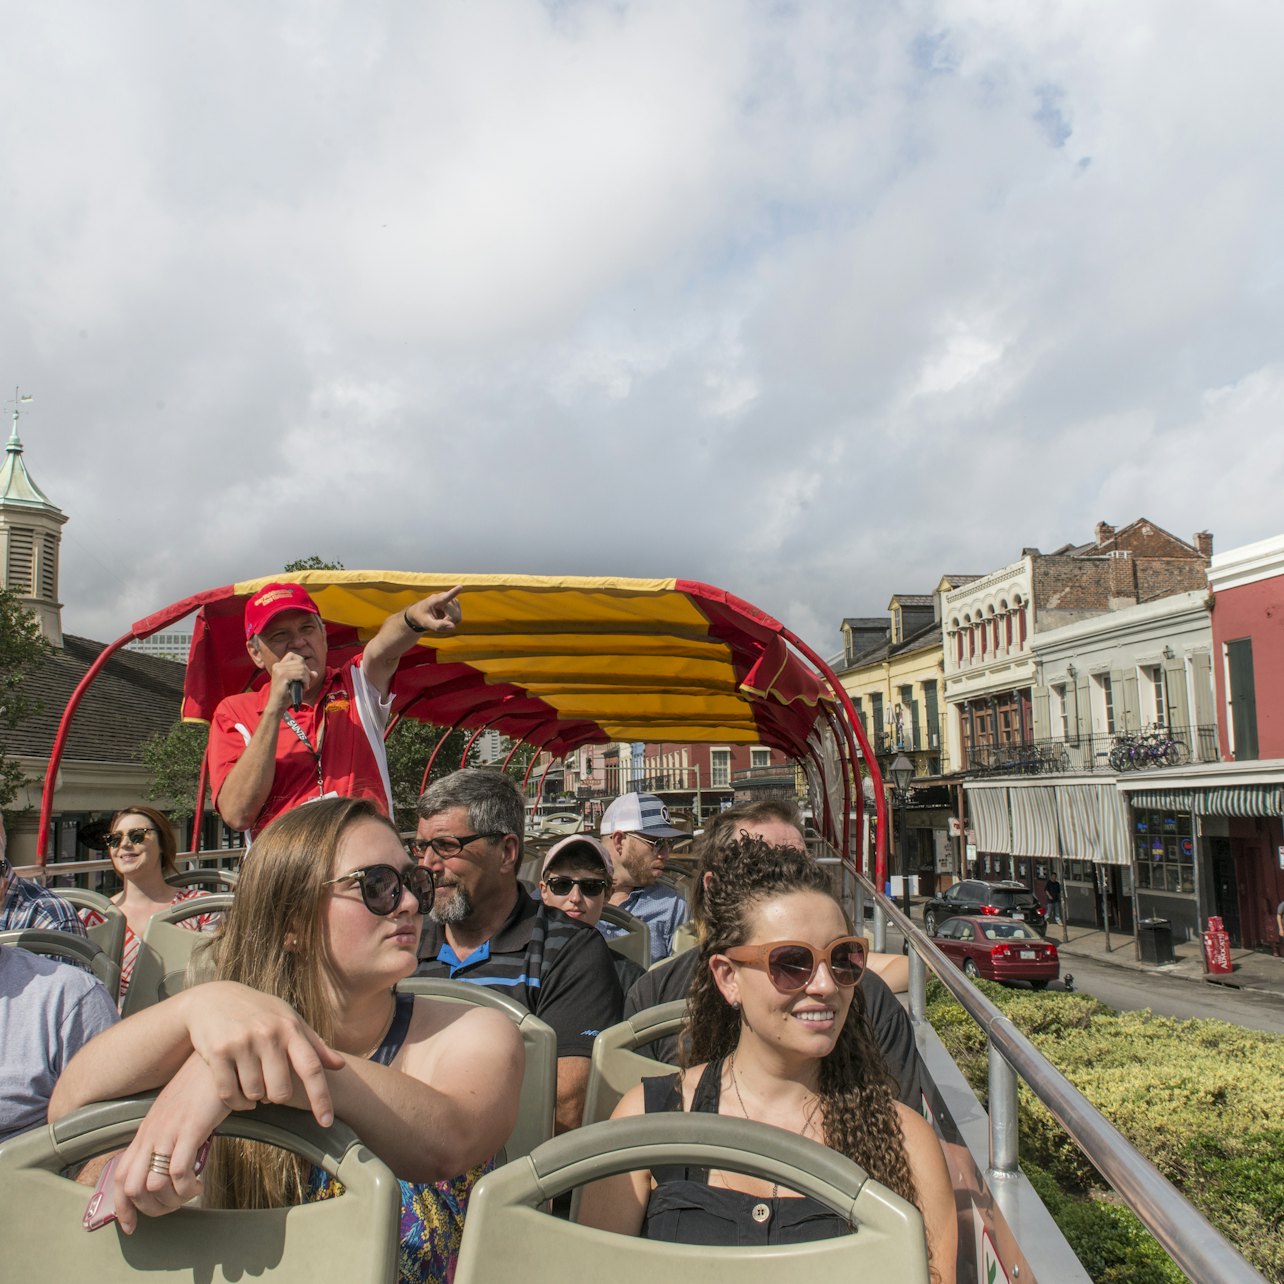 Bus Hop-on Hop-off New Orleans - Alloggi in Nuova Orleans